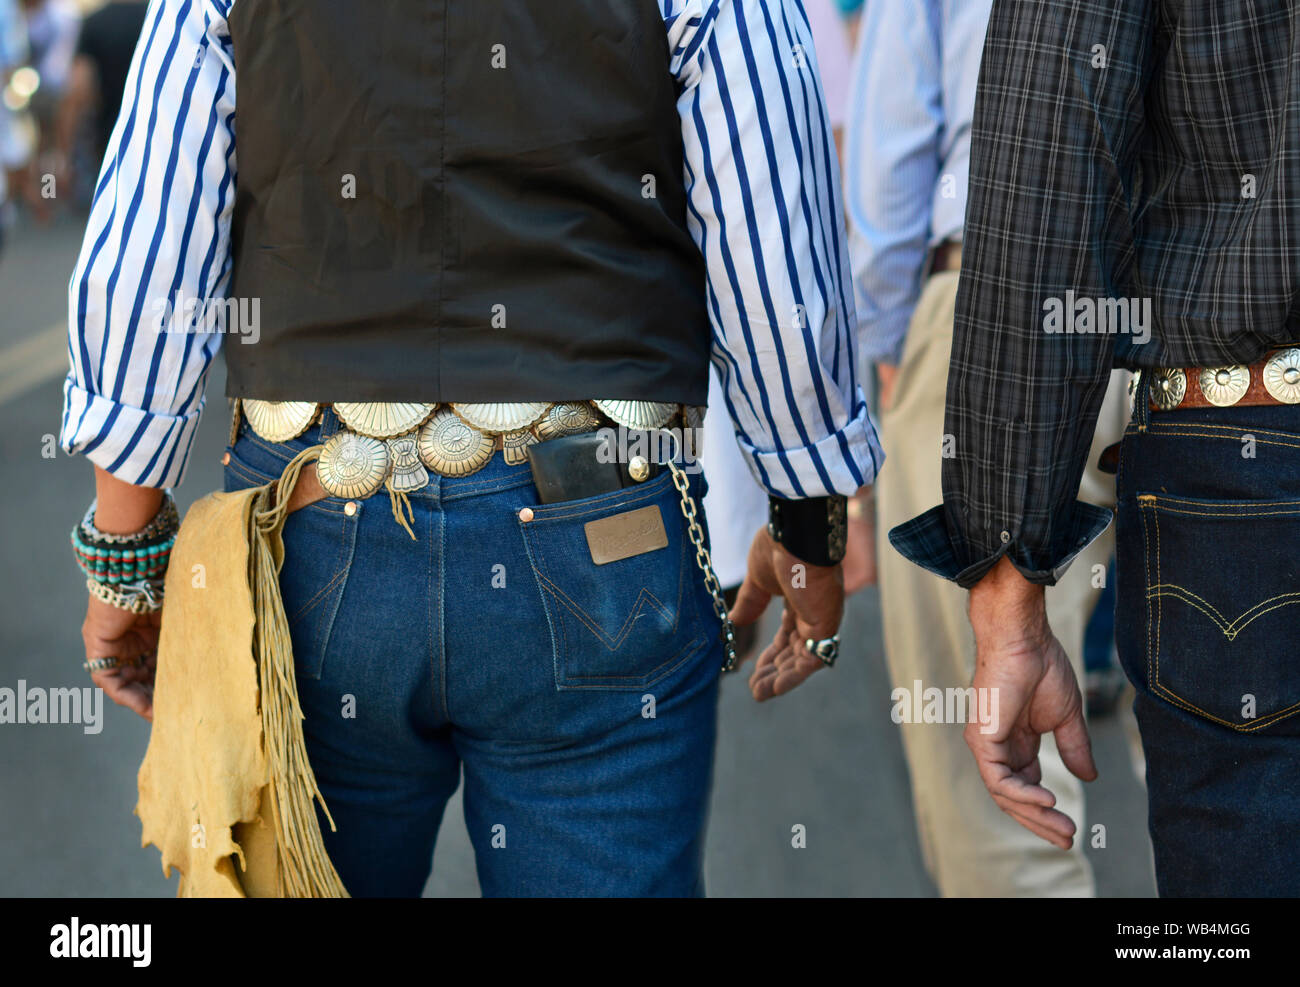 Two men wearing western style attire including concho belts visit the Santa Fe Indian Market in New Mexico, USA Stock Photo